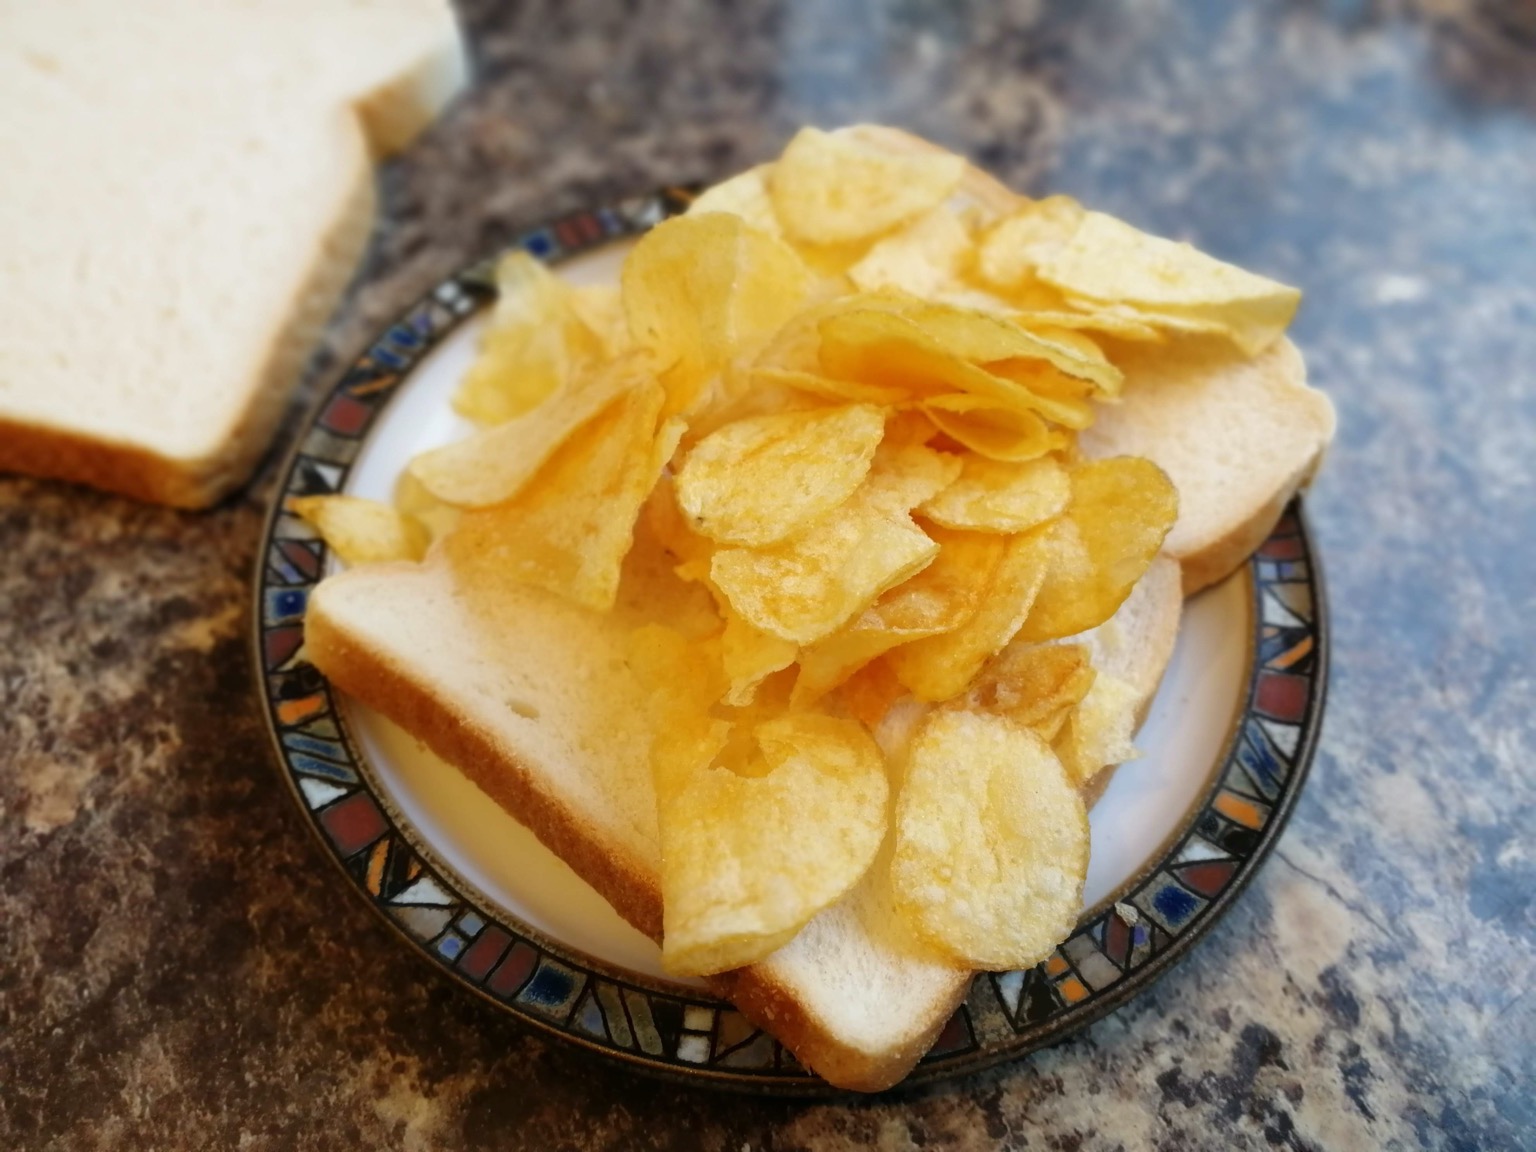 Crisps on sliced white bread with lid off